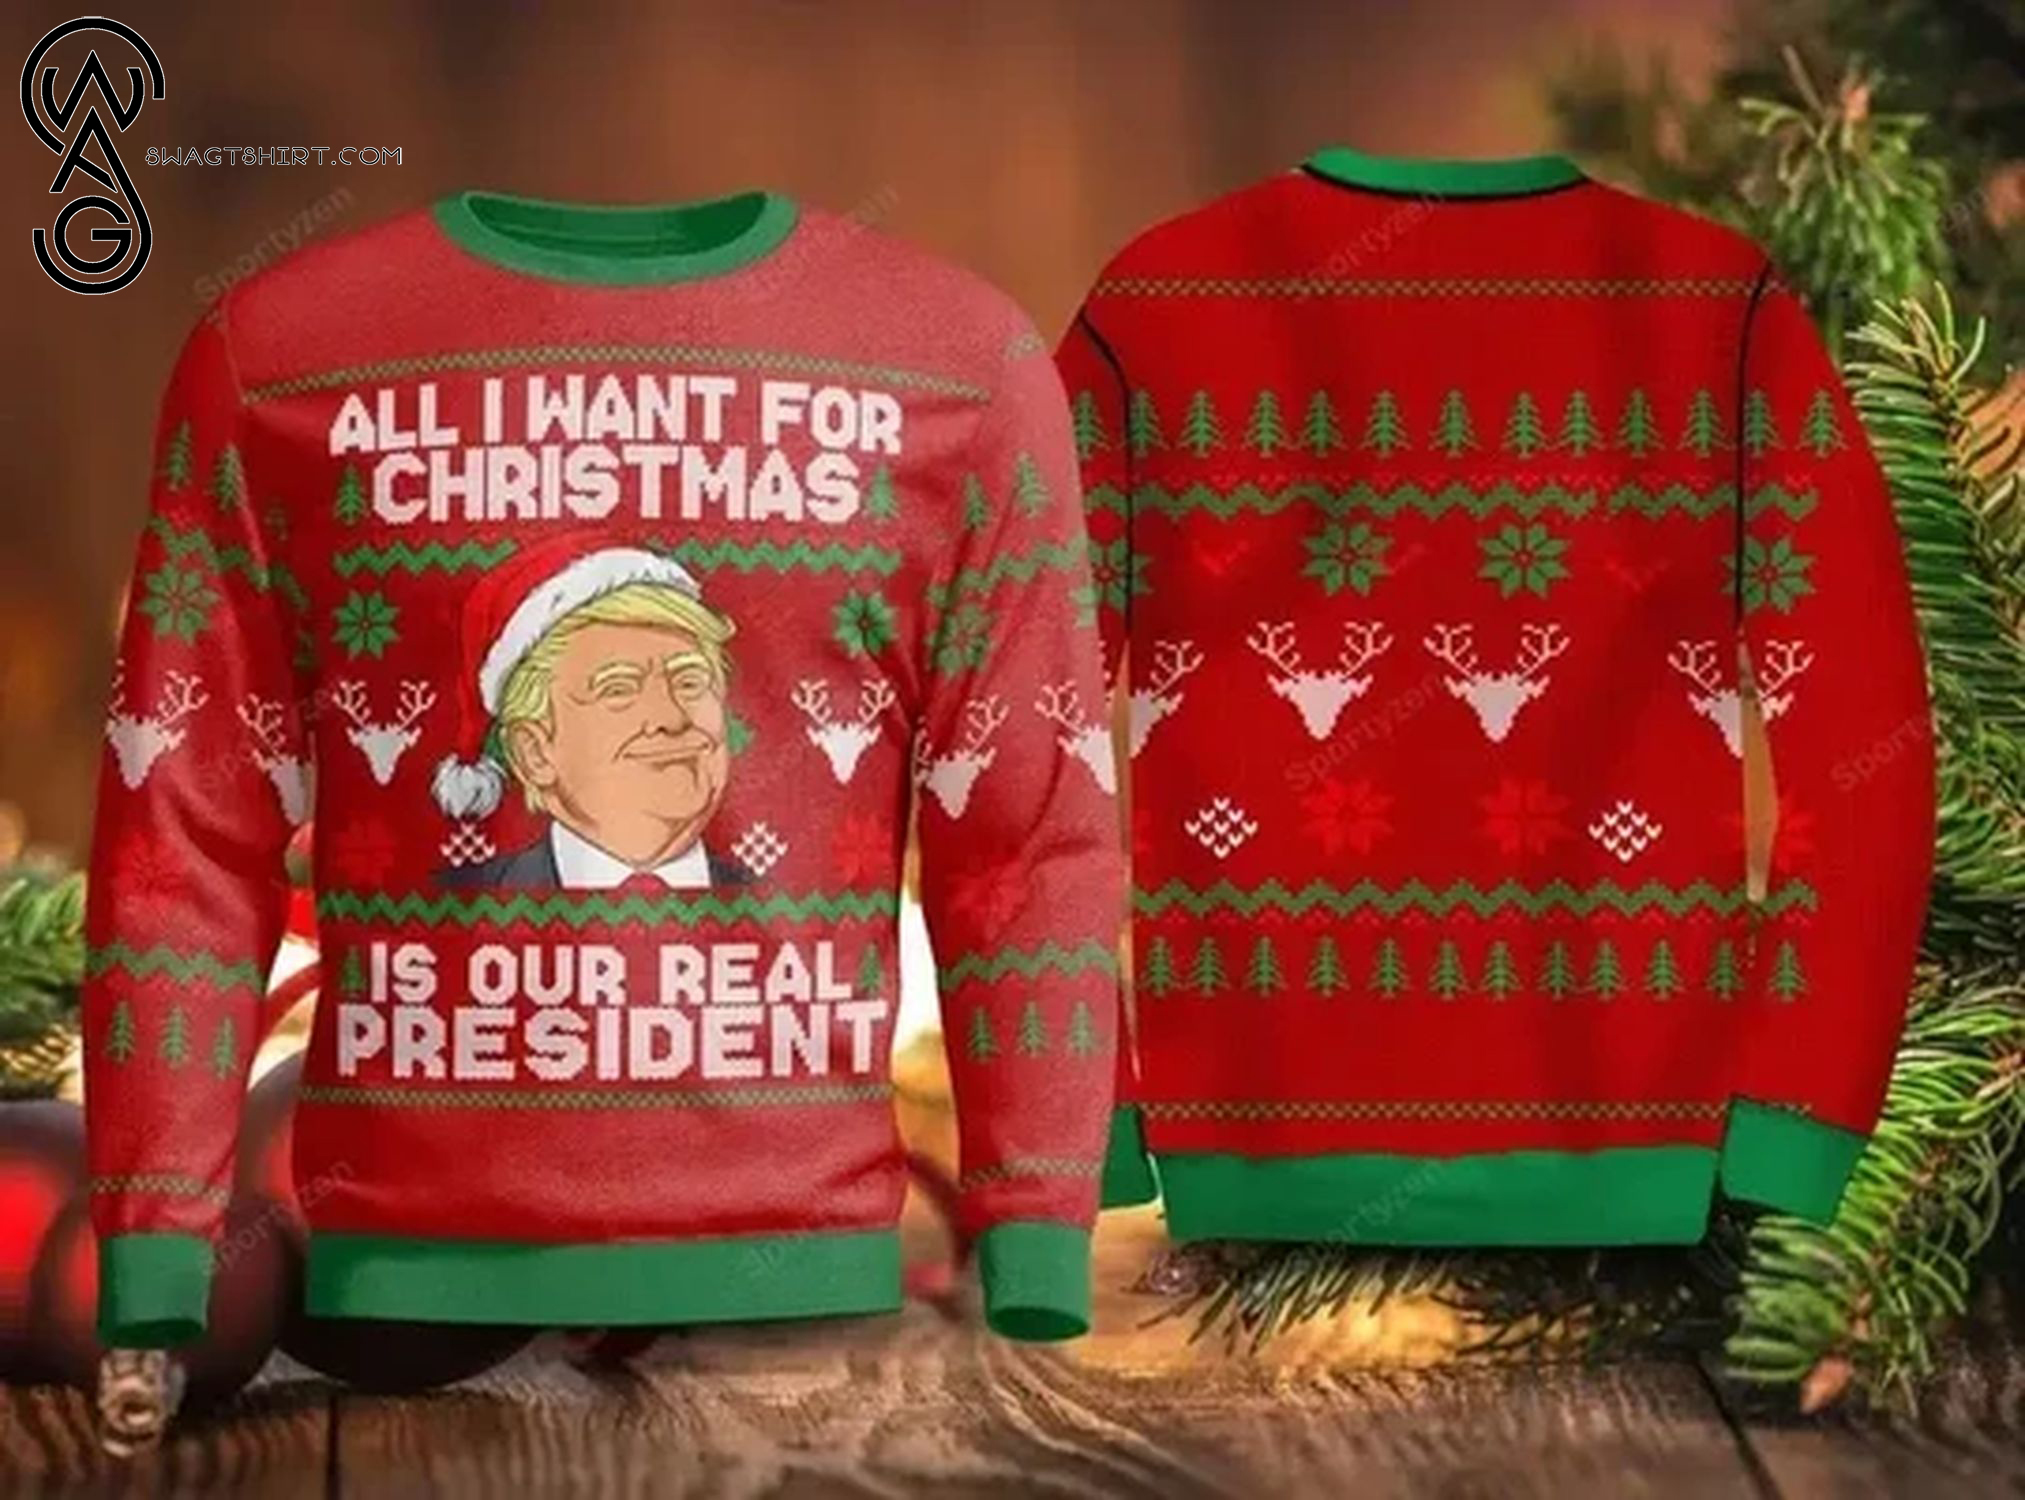 All I Want For Christmas is a Real President Full Print Ugly Christmas Sweater